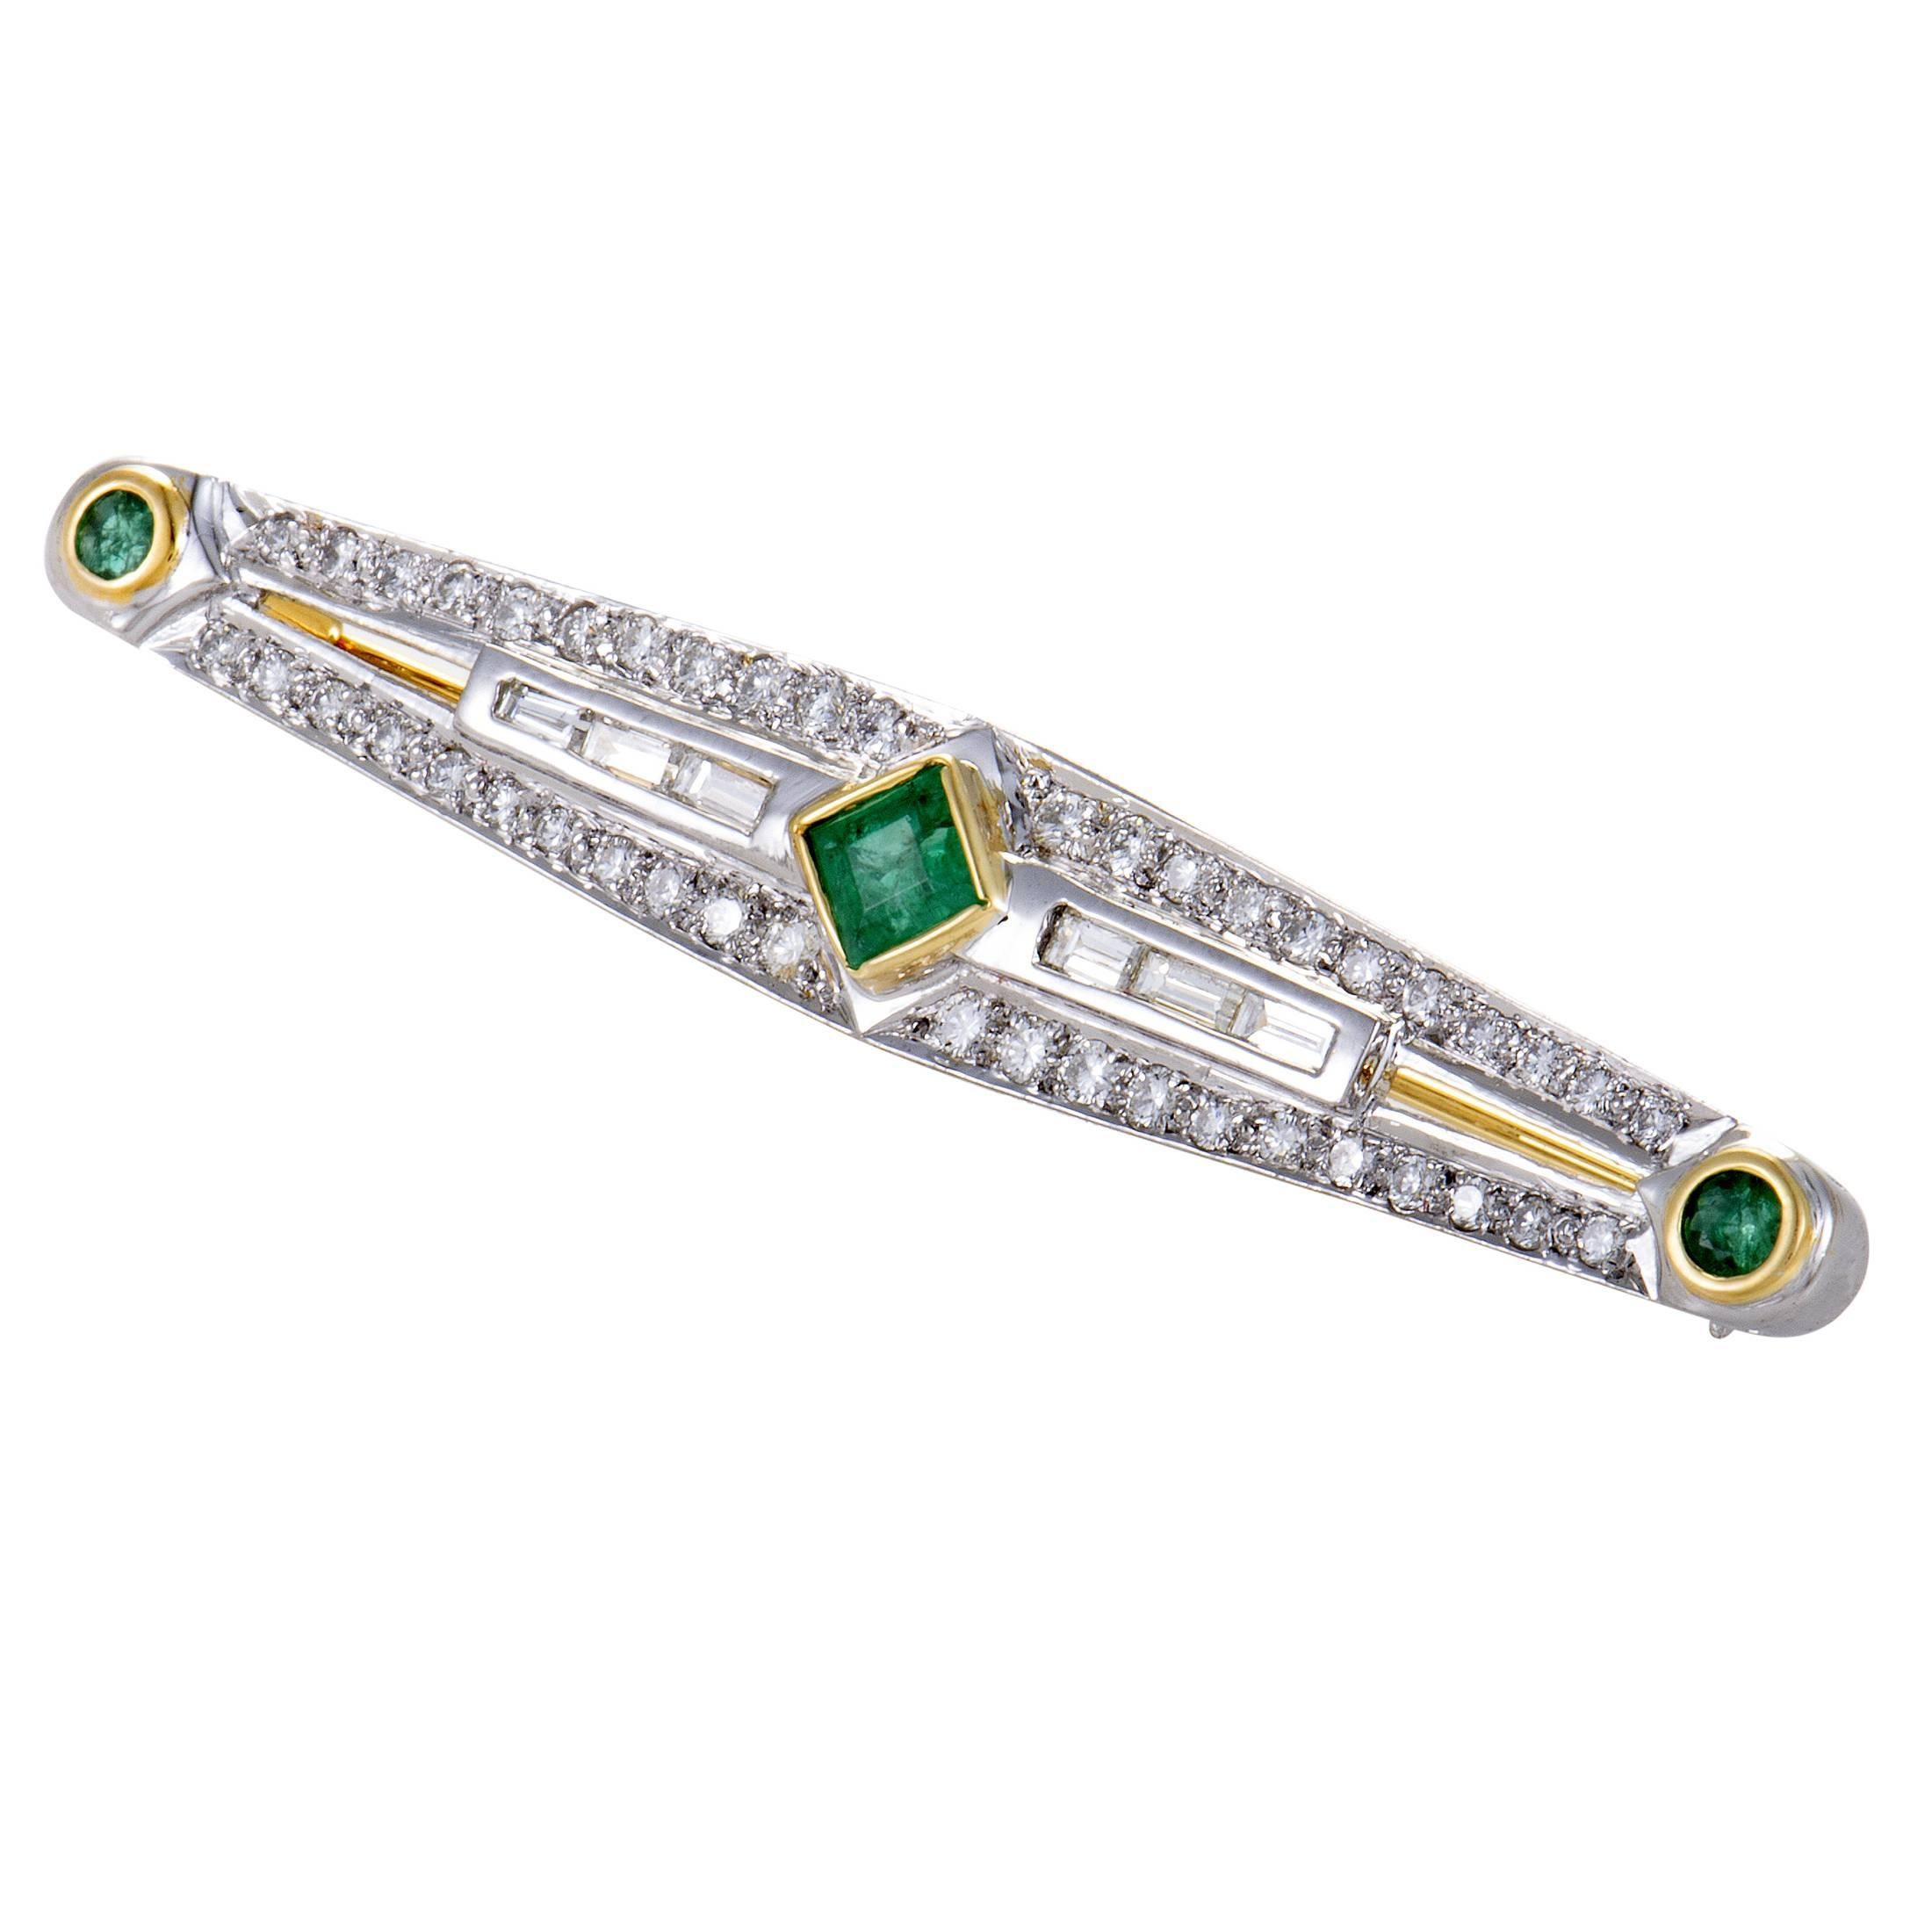 While shimmering 14K white gold and sparkling diamonds totaling approximately 1.35 carats set a bright overall tone for this exceptional antique brooch, warm 14K yellow gold and stunning emeralds amounting to 0.75ct add vivid color to the charming